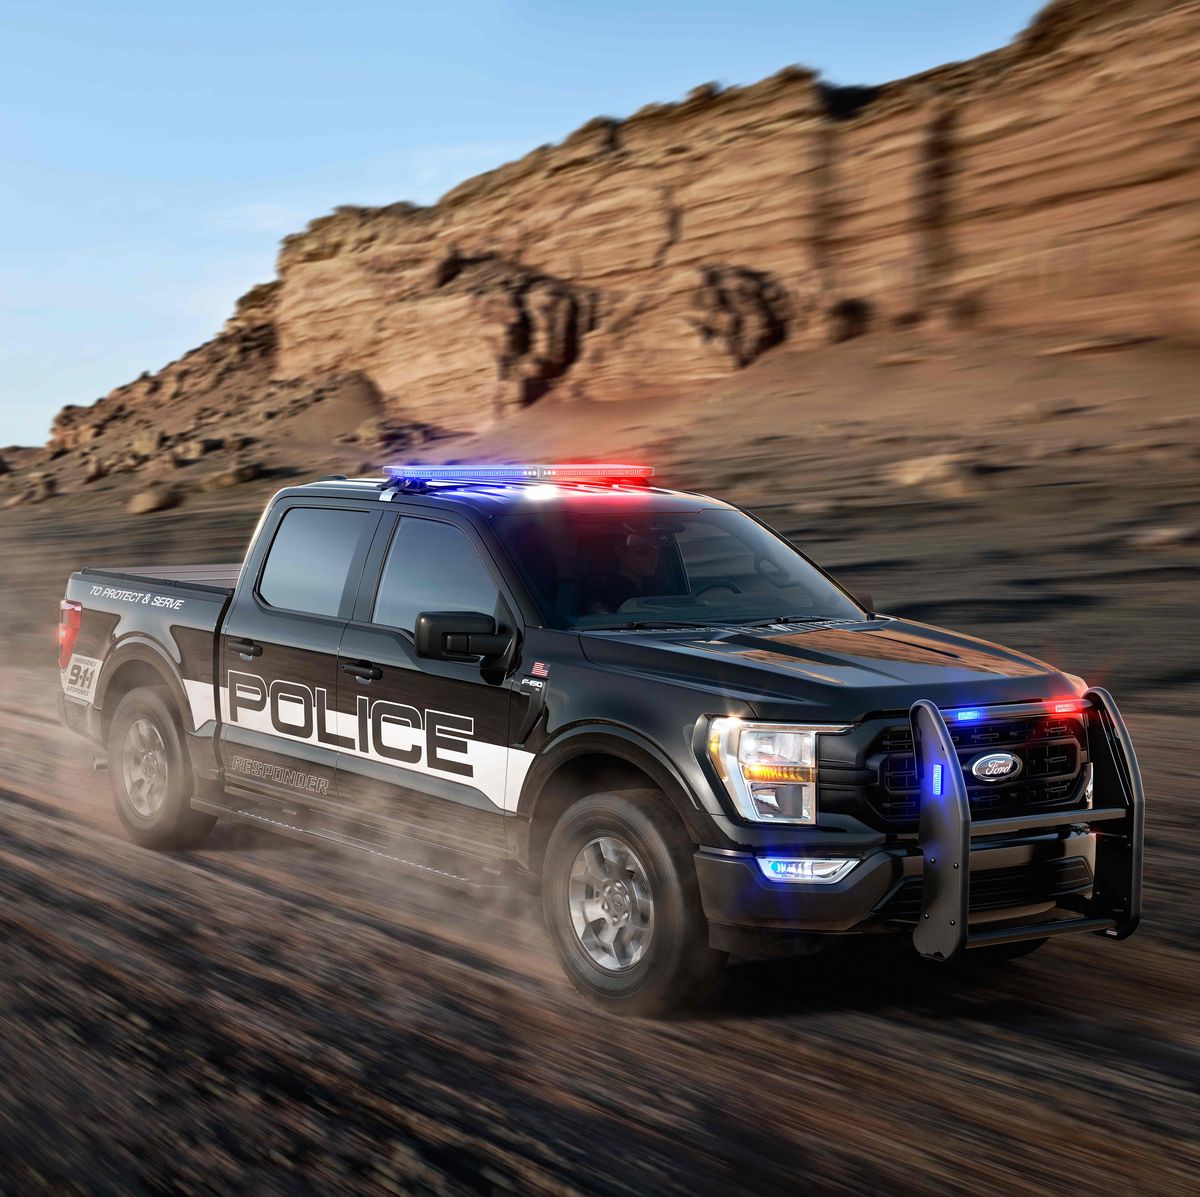 2021 Ford F-150 Police Responder Pickup Now Has 120-MPH Top Speed